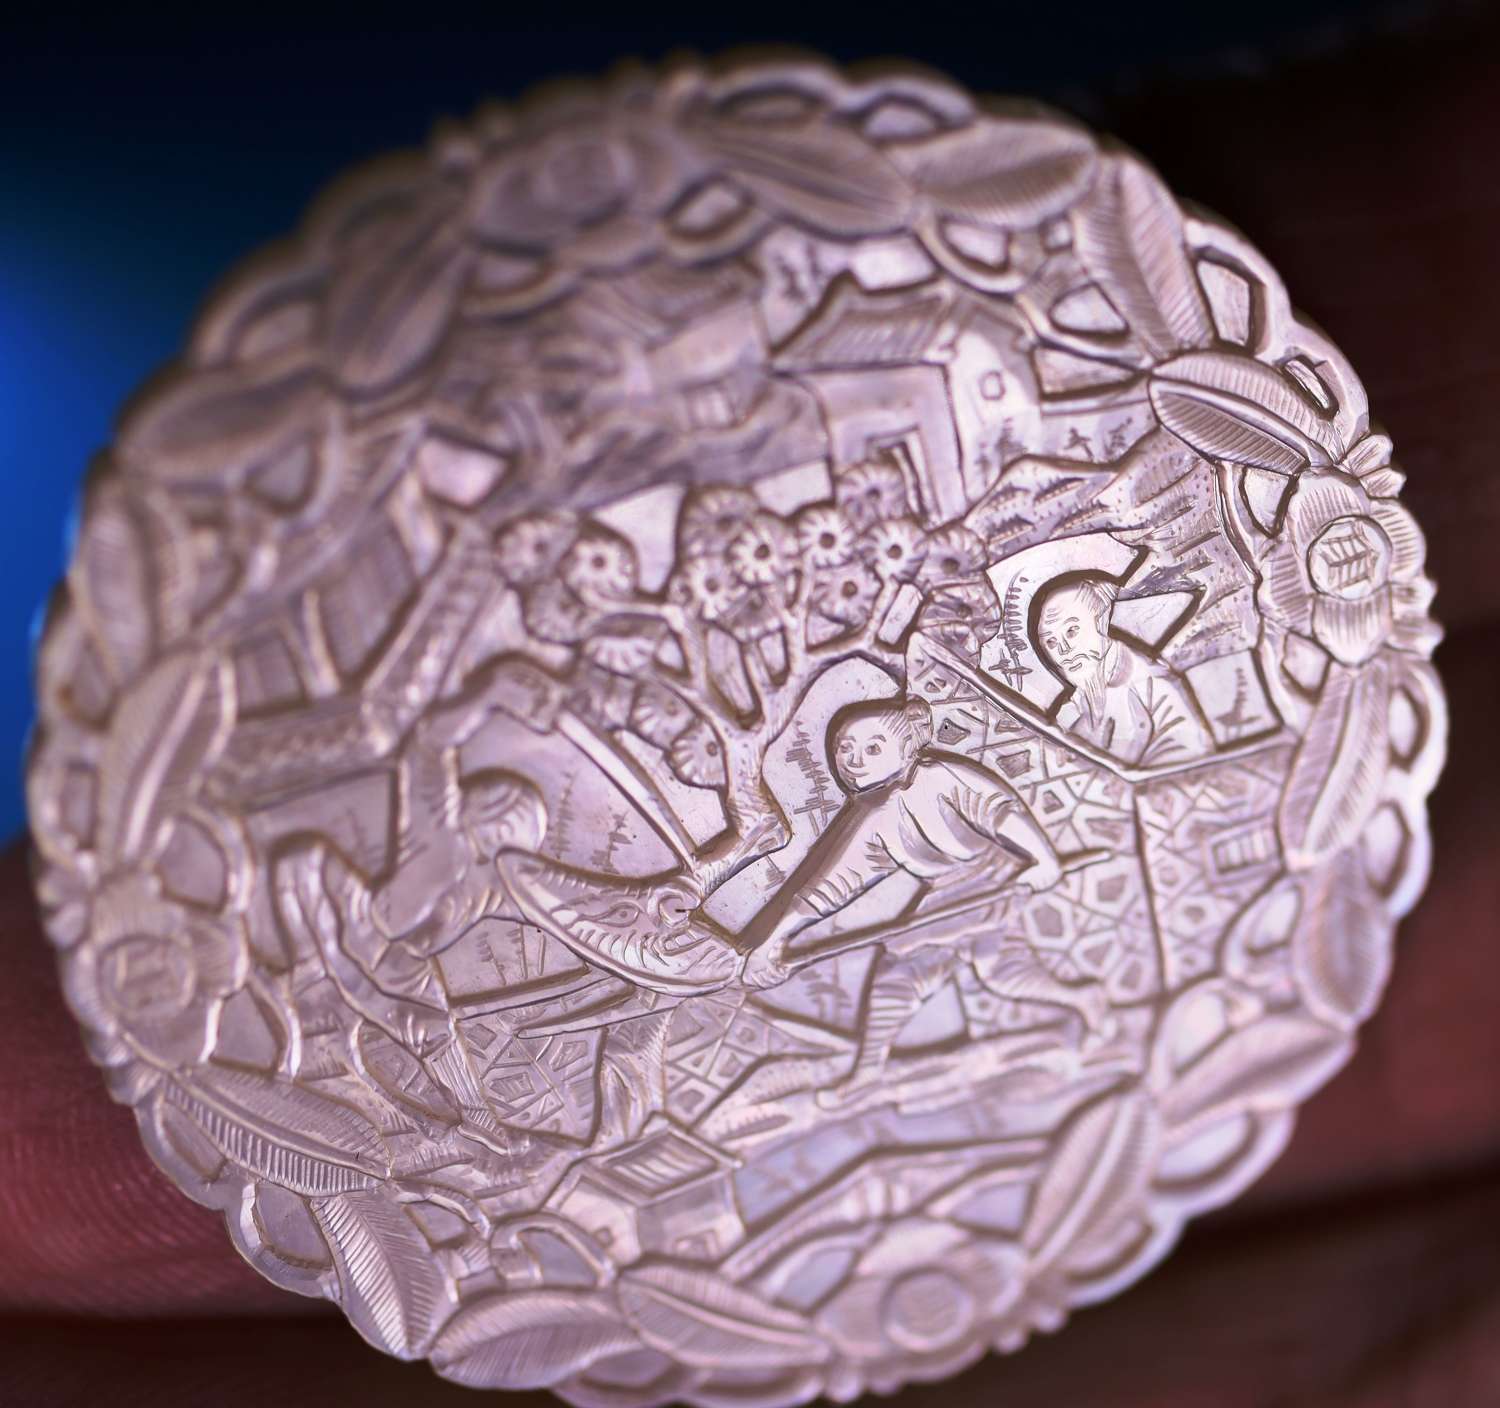 SUPERB EXTRA-LARGE ROUND DEEP-CARVED